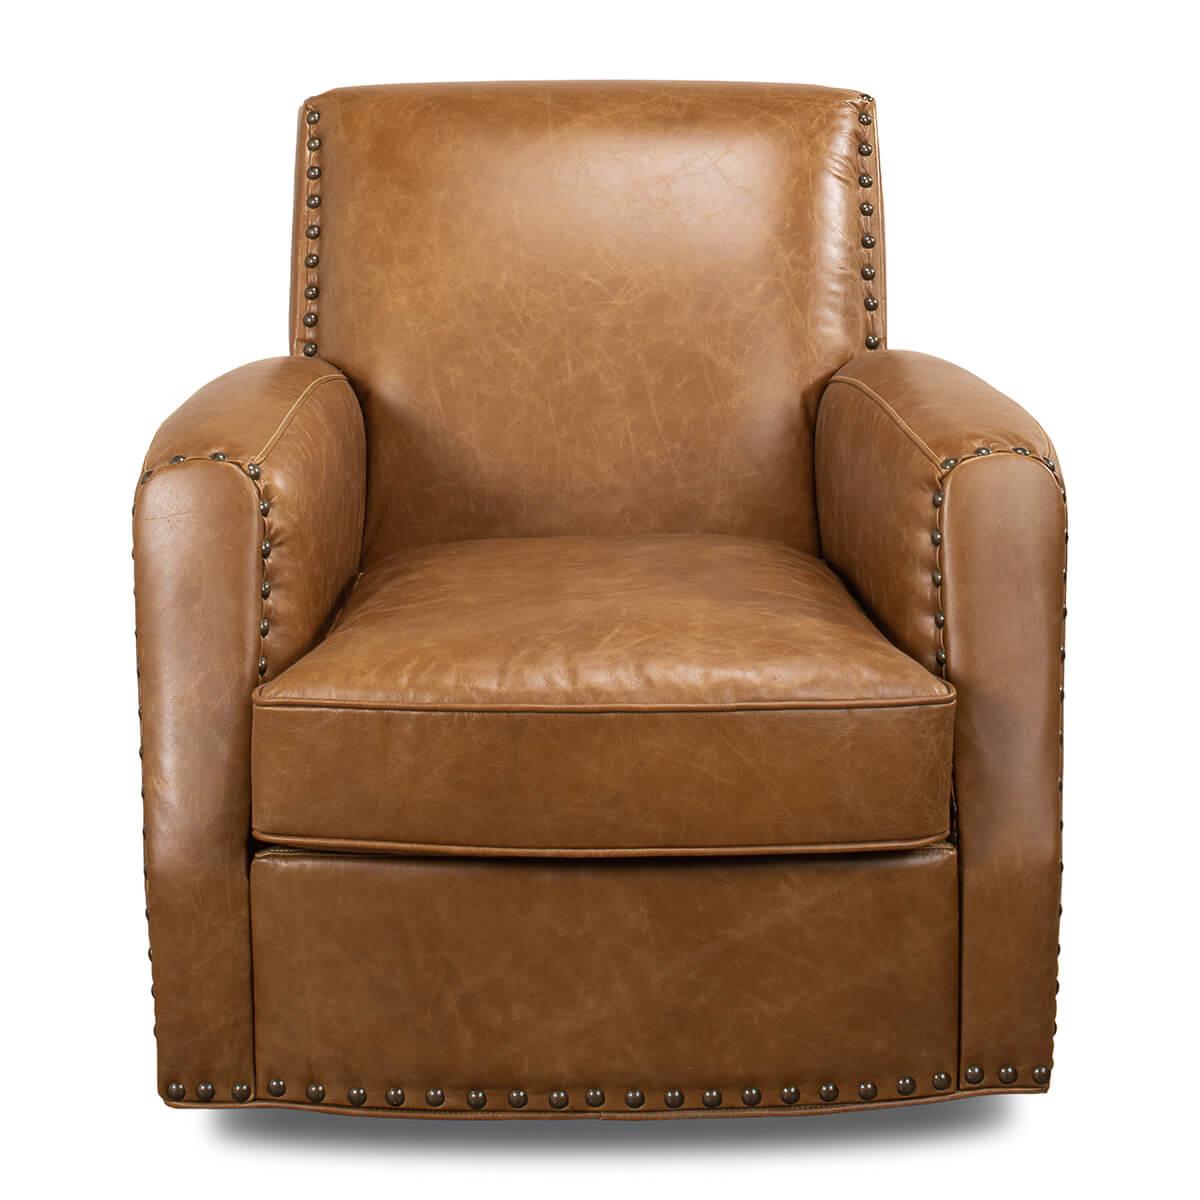 A Classic style Cuba brown leather upholstered armchair, upholstered with pure aniline top grade leather, with large nailhead details on a swivel base.

Dimensions: 32